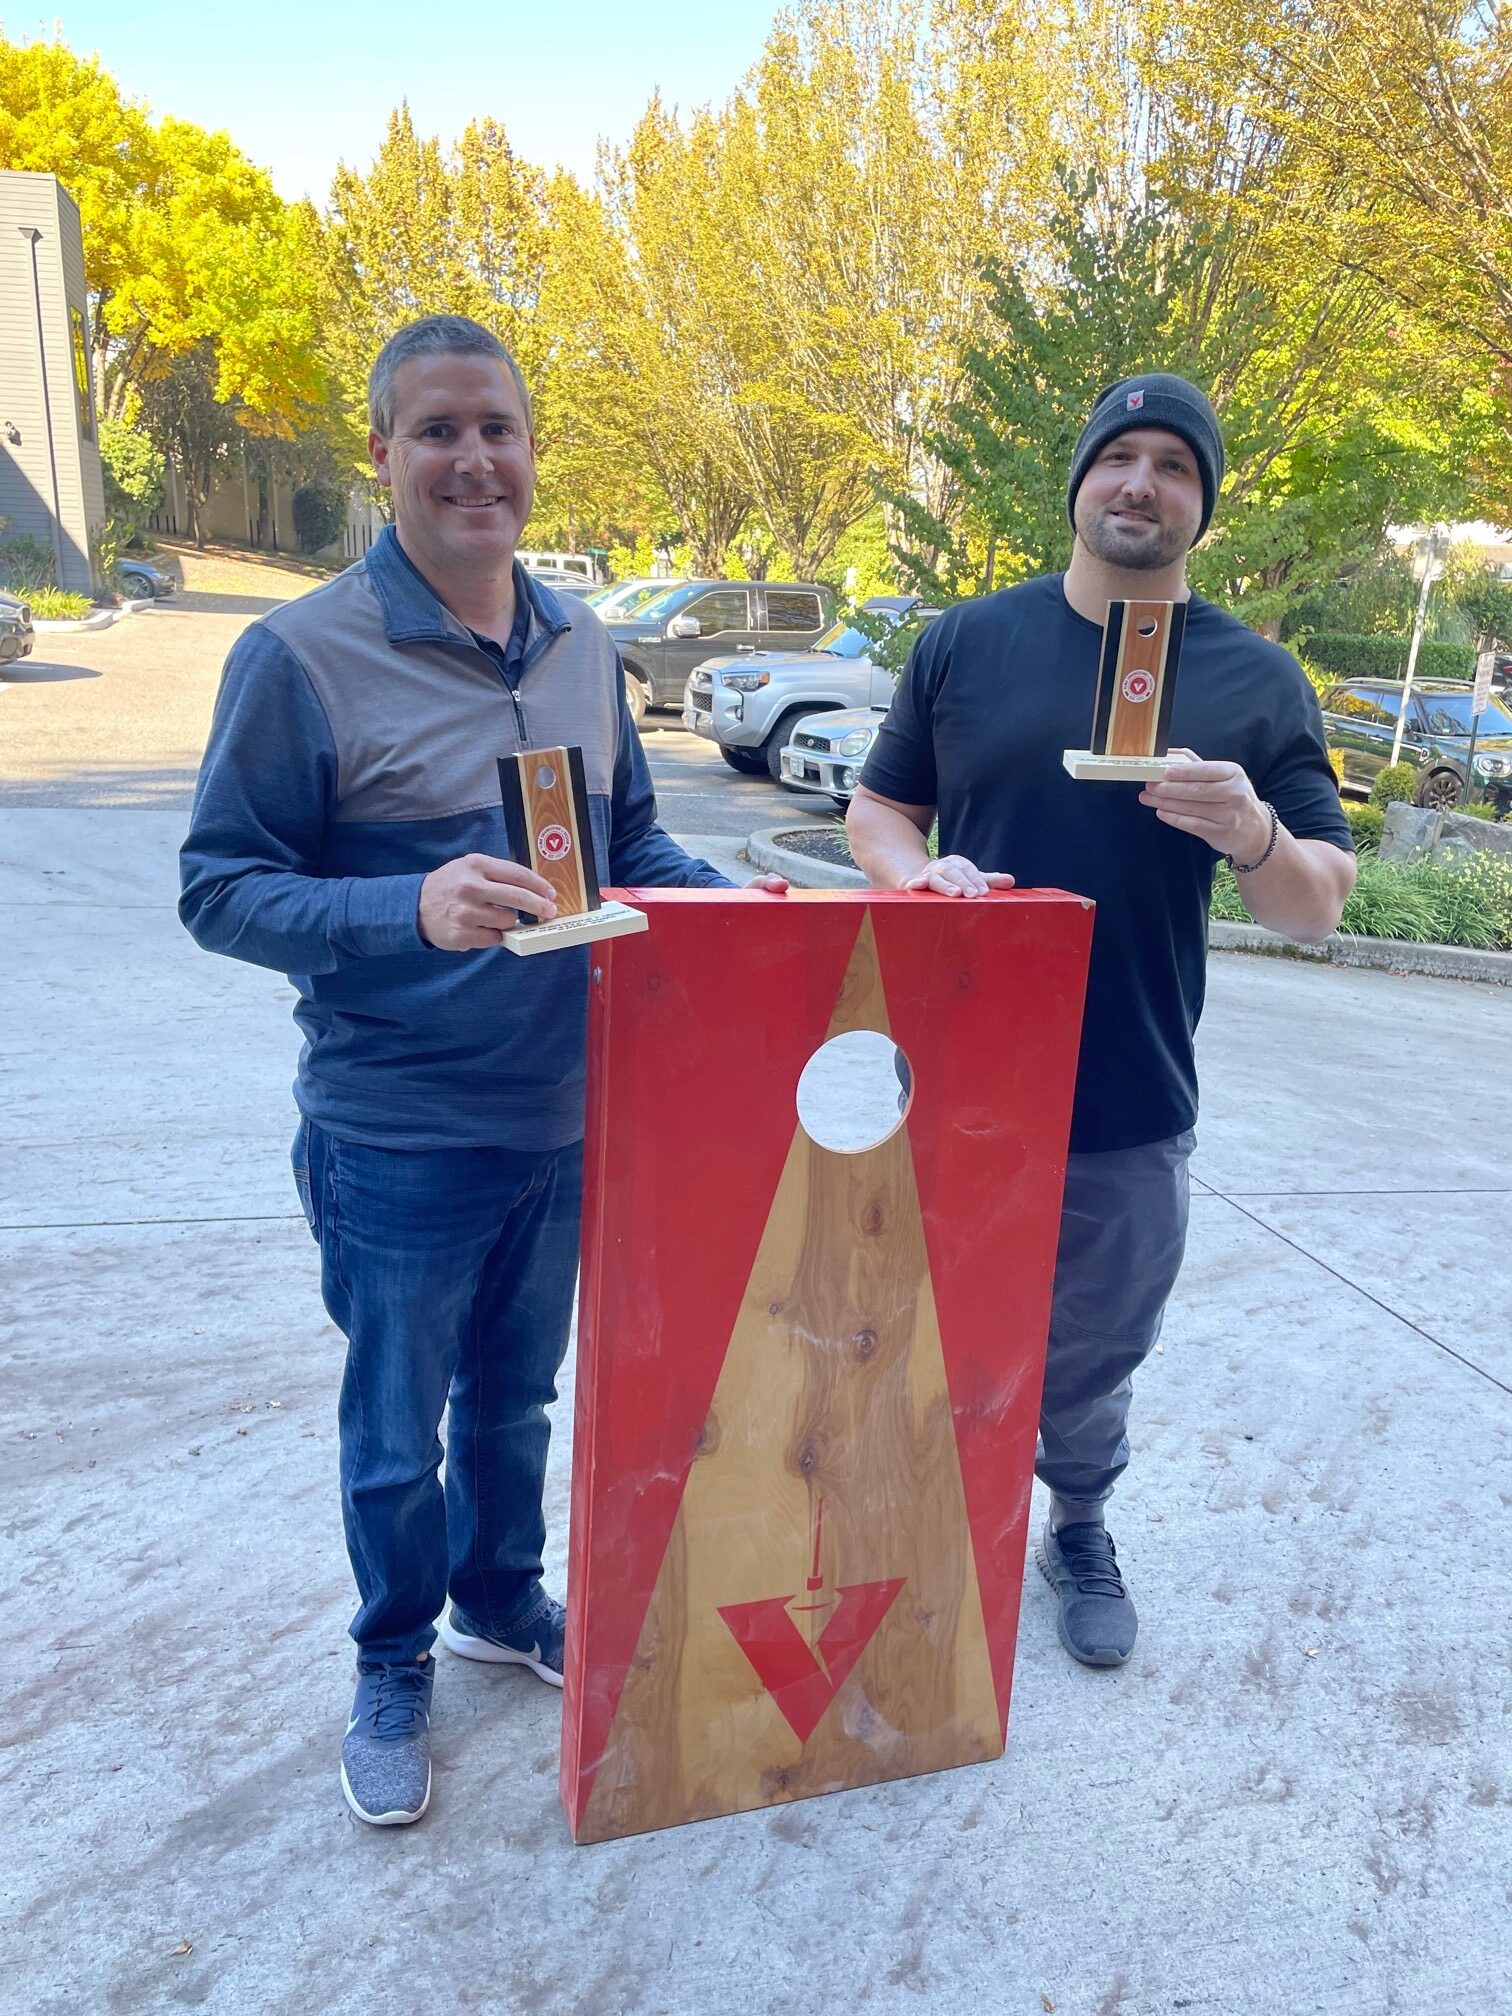 Two VLMK staff holding a cornhole board and trophies